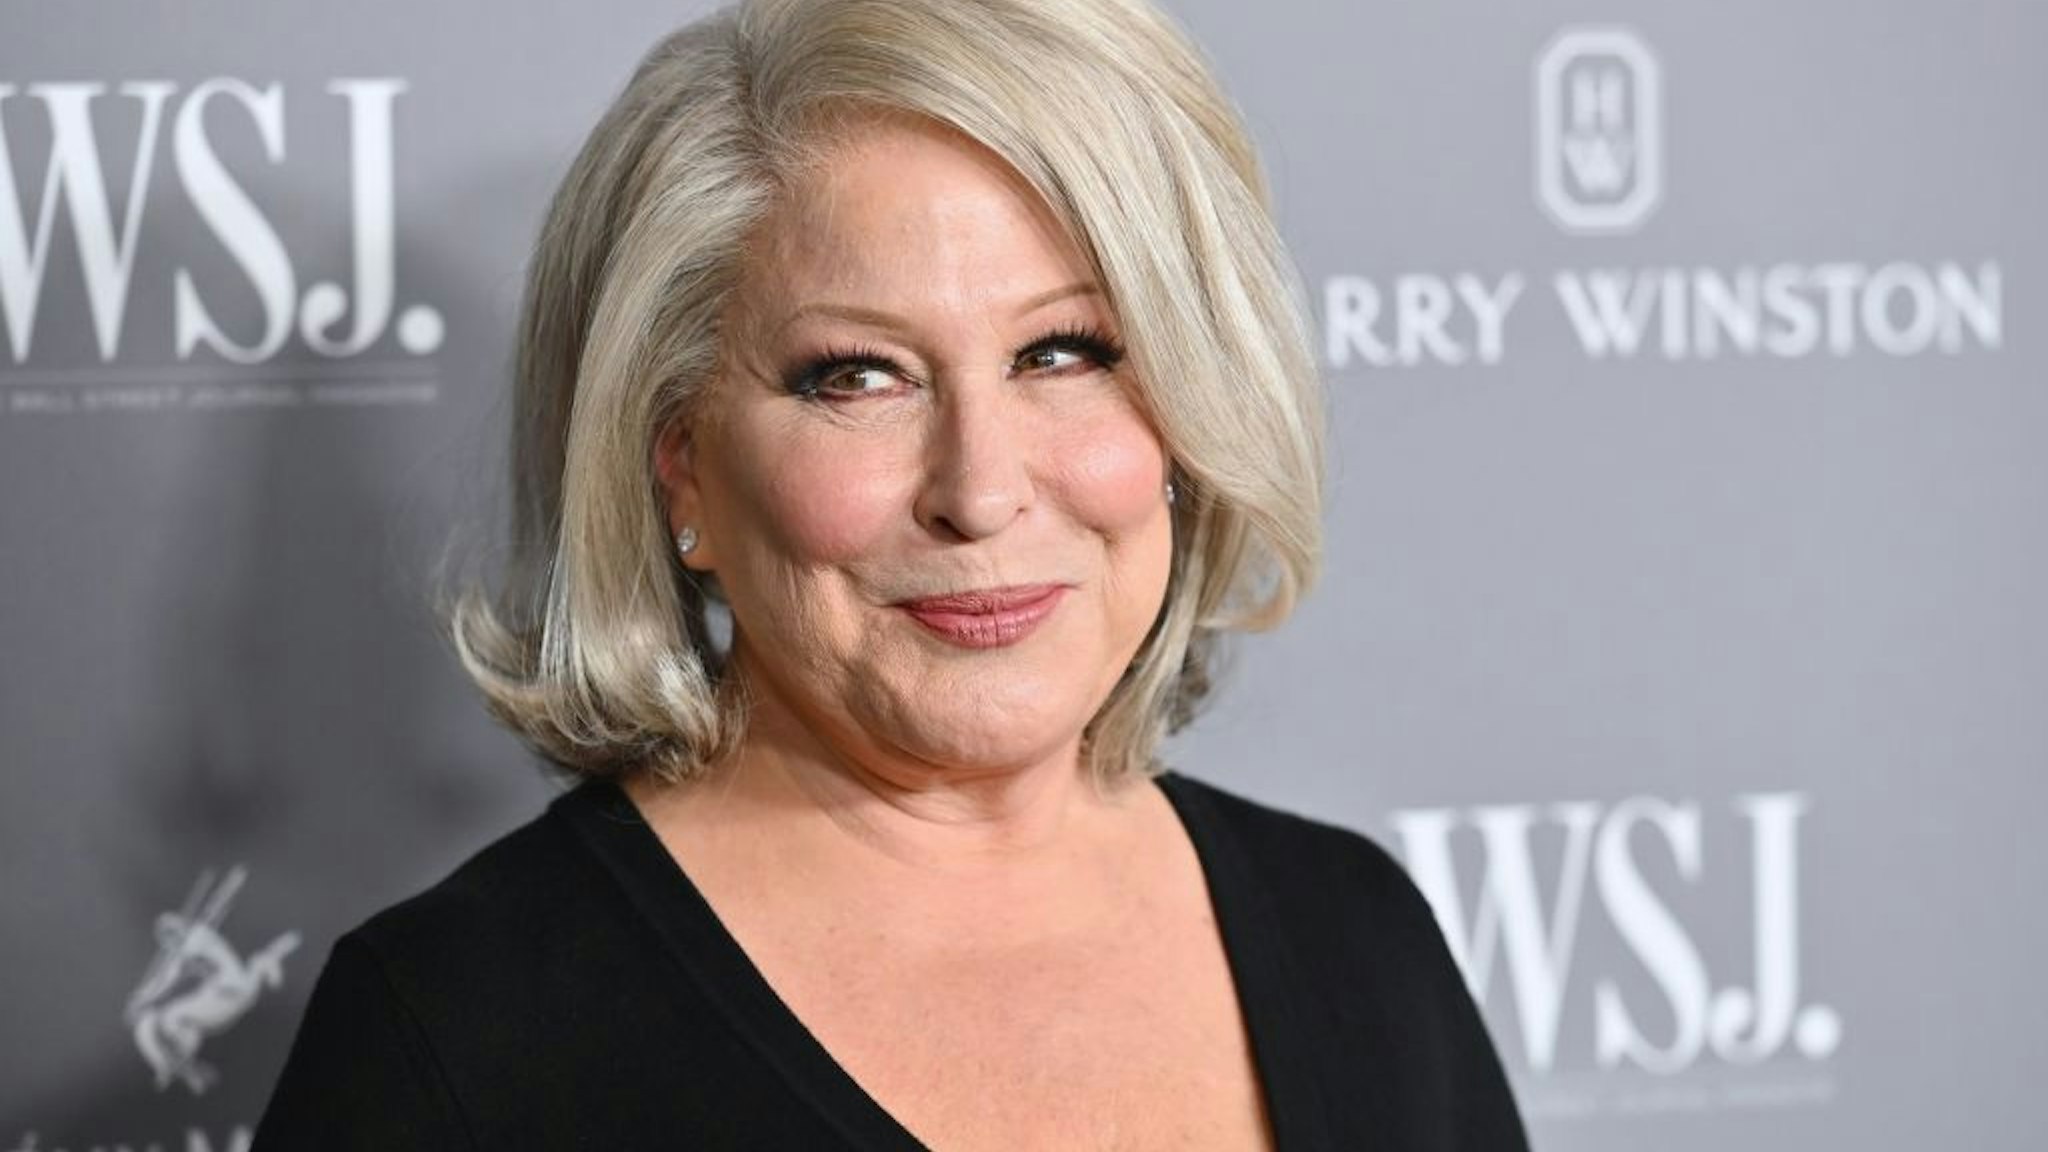 US actress Bette Midler attends the WSJ Magazine 2019 Innovator Awards at MOMA on November 6, 2019 in New York City. (Photo by Angela Weiss / AFP) (Photo by ANGELA WEISS/AFP via Getty Images)